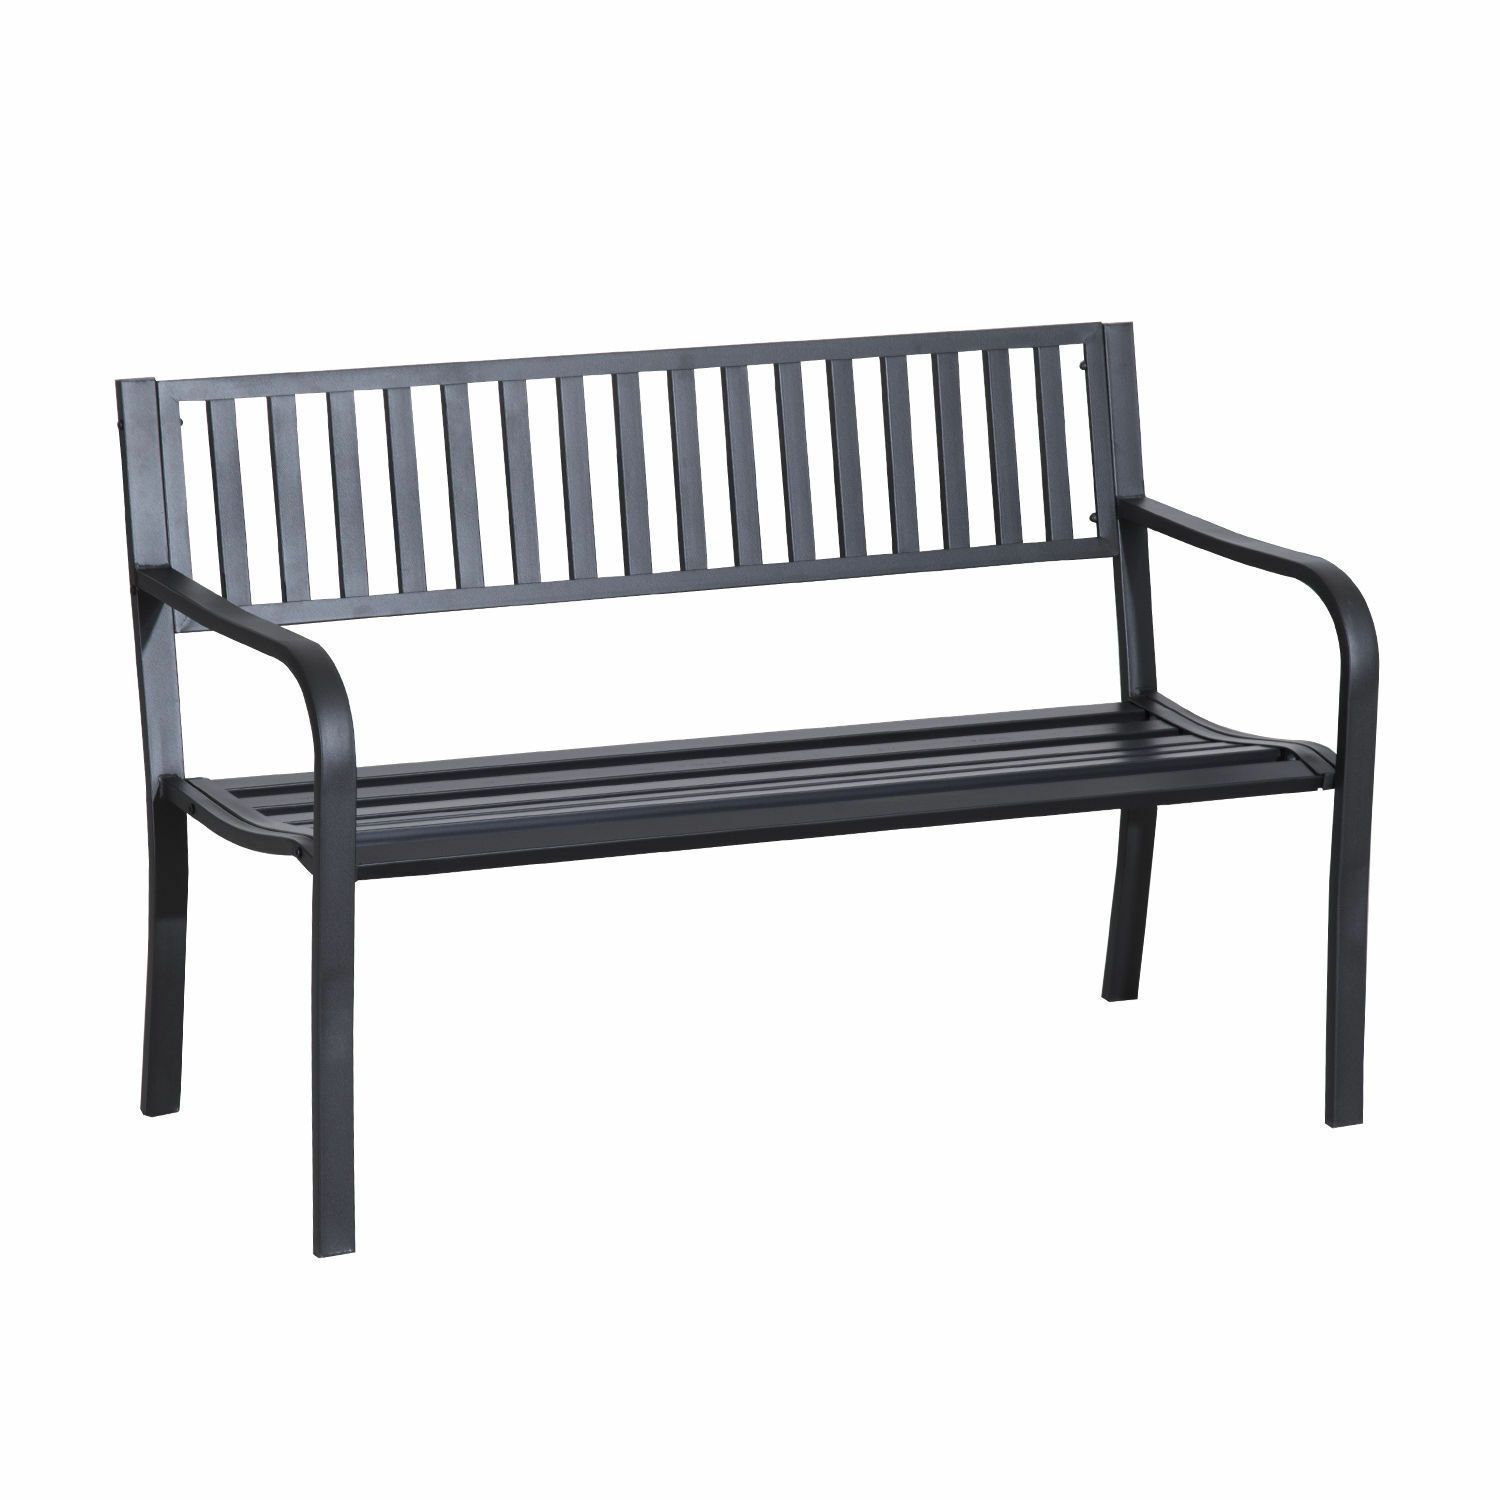 Pin On Patio Chair Throughout Alvah Slatted Cast Iron And Tubular Steel Garden Benches (View 3 of 25)